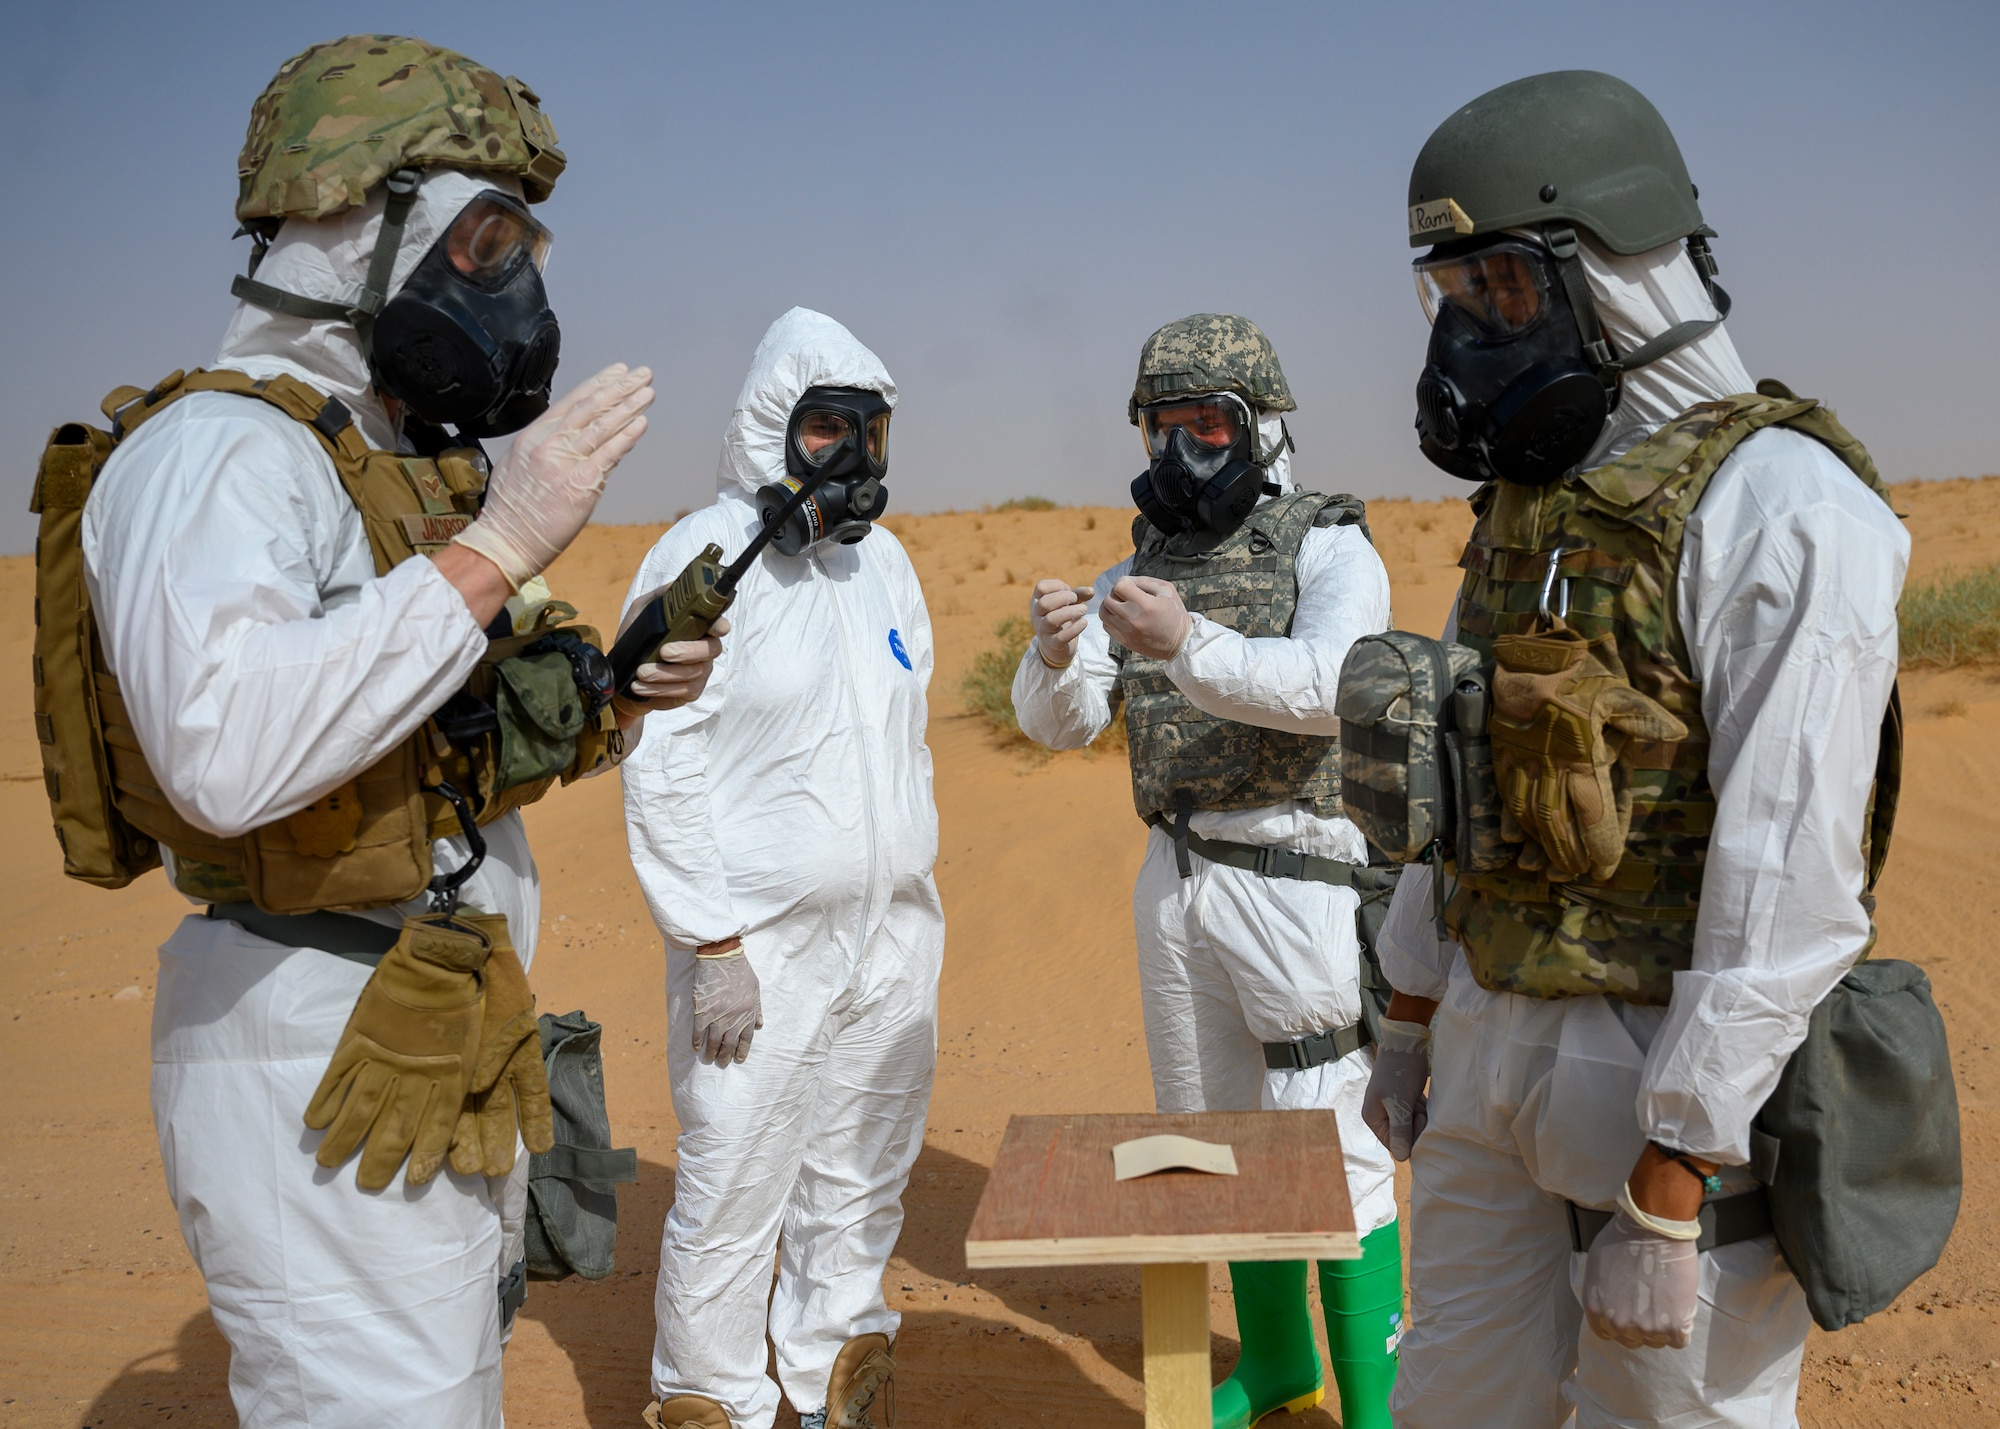 Members of the 378th Civil Engineer Squadron emergency management flight and members of the Royal Saudi Air Force discuss simulated readings on an M9 paper during a chemical, biological, radiological and nuclear response exercise, Prince Sultan Air Base, Kingdom of Saudi Arabia, May 26, 2021. The combined exercise demonstrates the emergency management integration between USAF and RSAF CBRN response units while also familiarizing each unit with the other’s techniques and procedures. (U.S. Air Force photo by Senior Airman Samuel Earick)